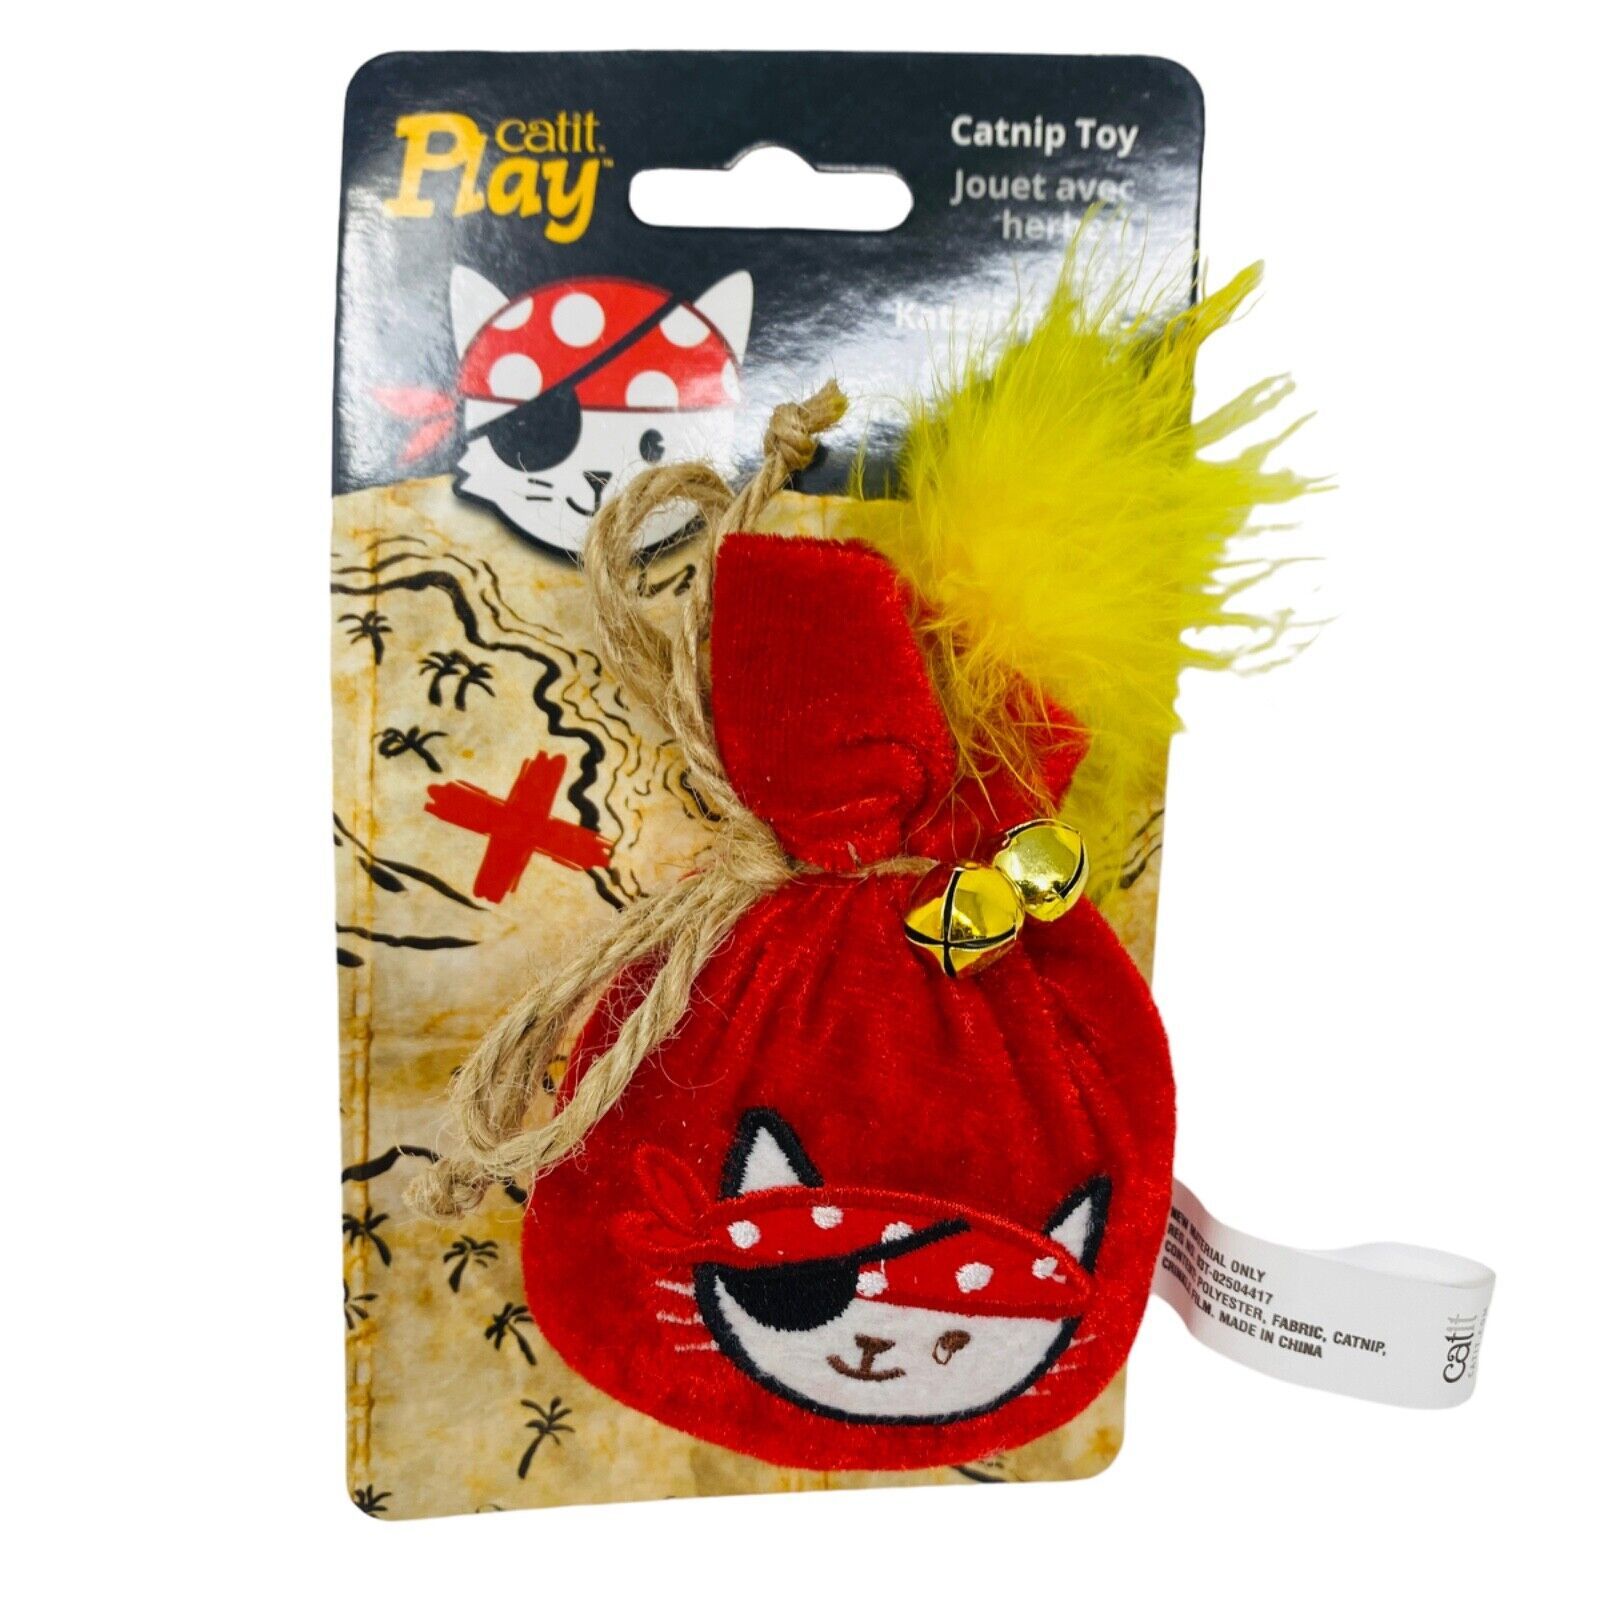 Catit Play Pirates Pouch of Gold Catnip Cat Toy - $4.94